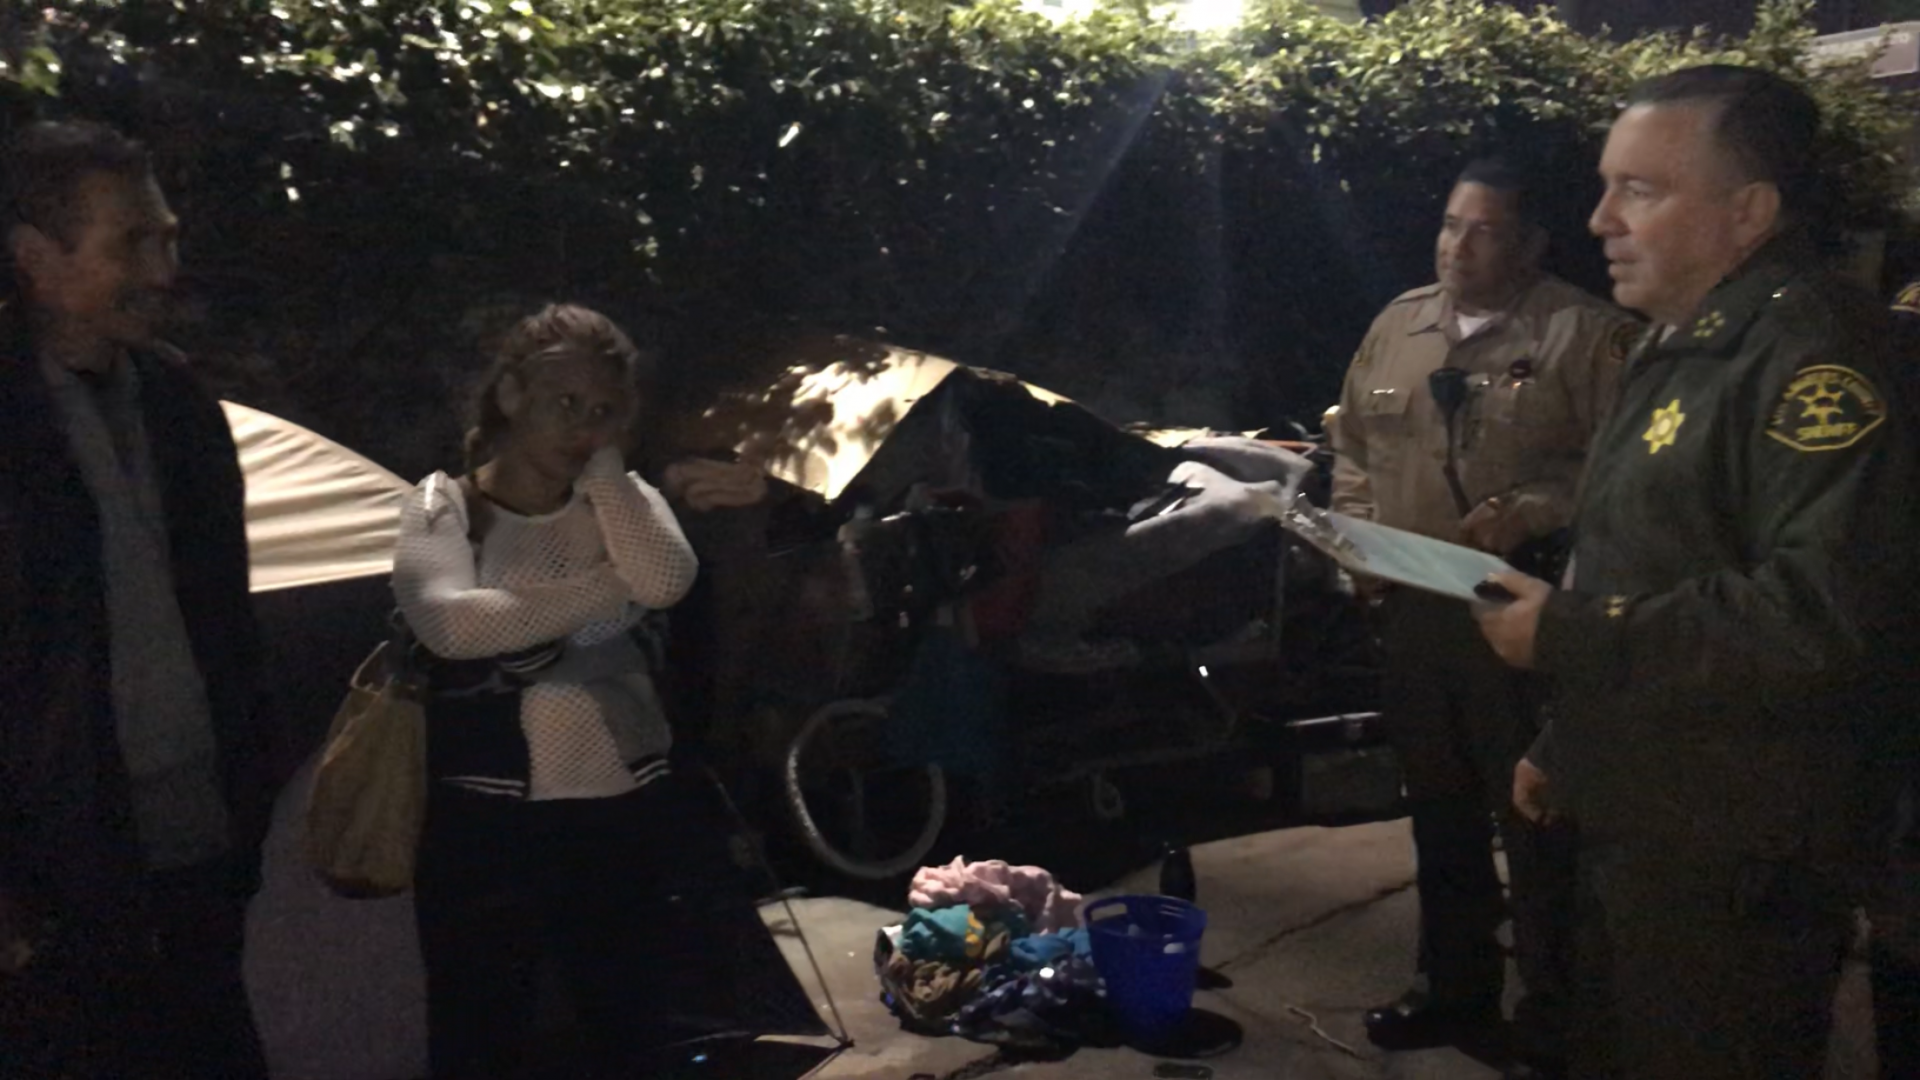 Sheriff Villanueva speaking to a man and woman in an alley